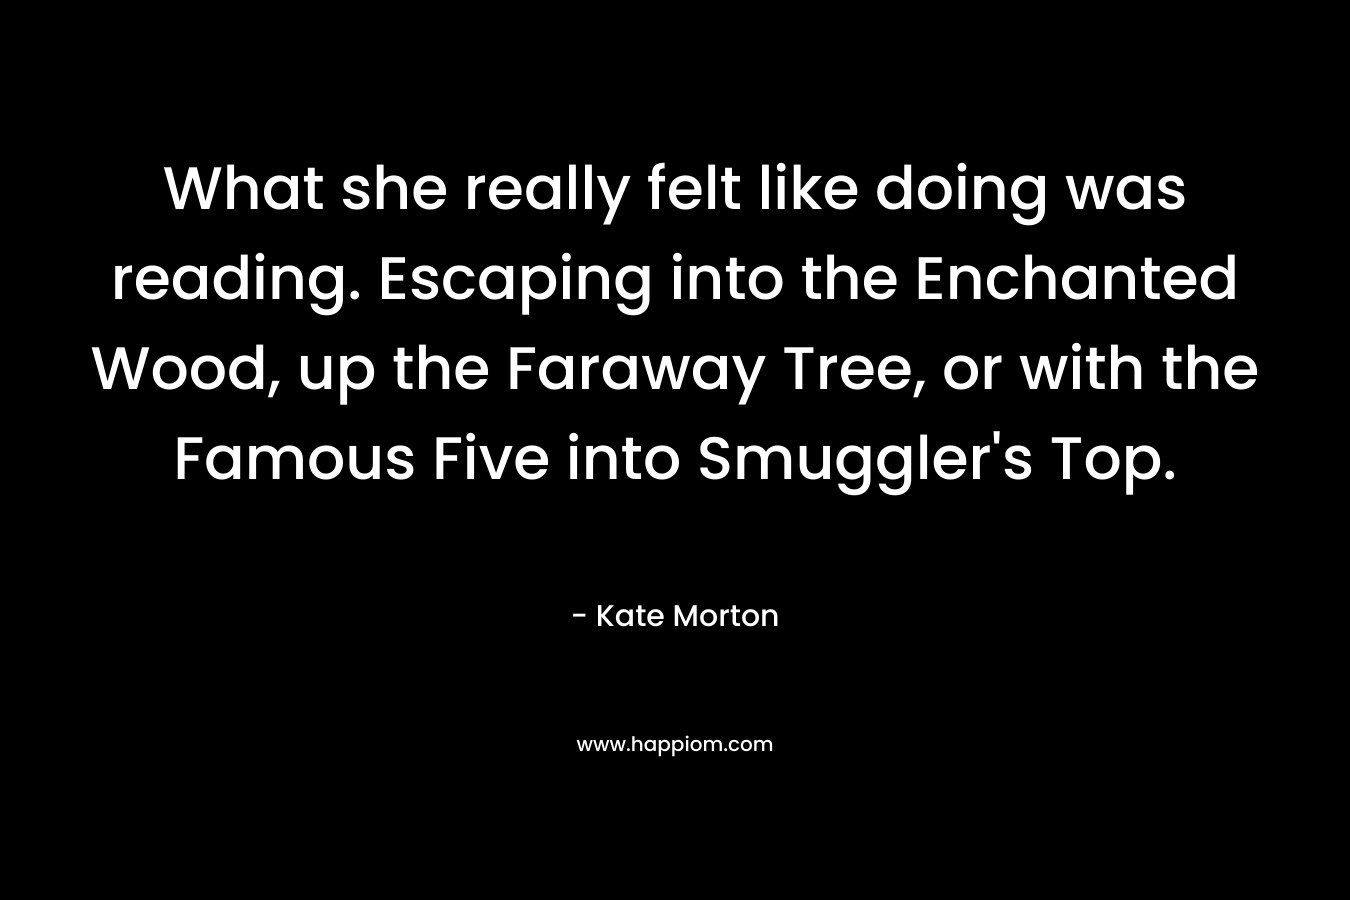 What she really felt like doing was reading. Escaping into the Enchanted Wood, up the Faraway Tree, or with the Famous Five into Smuggler’s Top. – Kate Morton